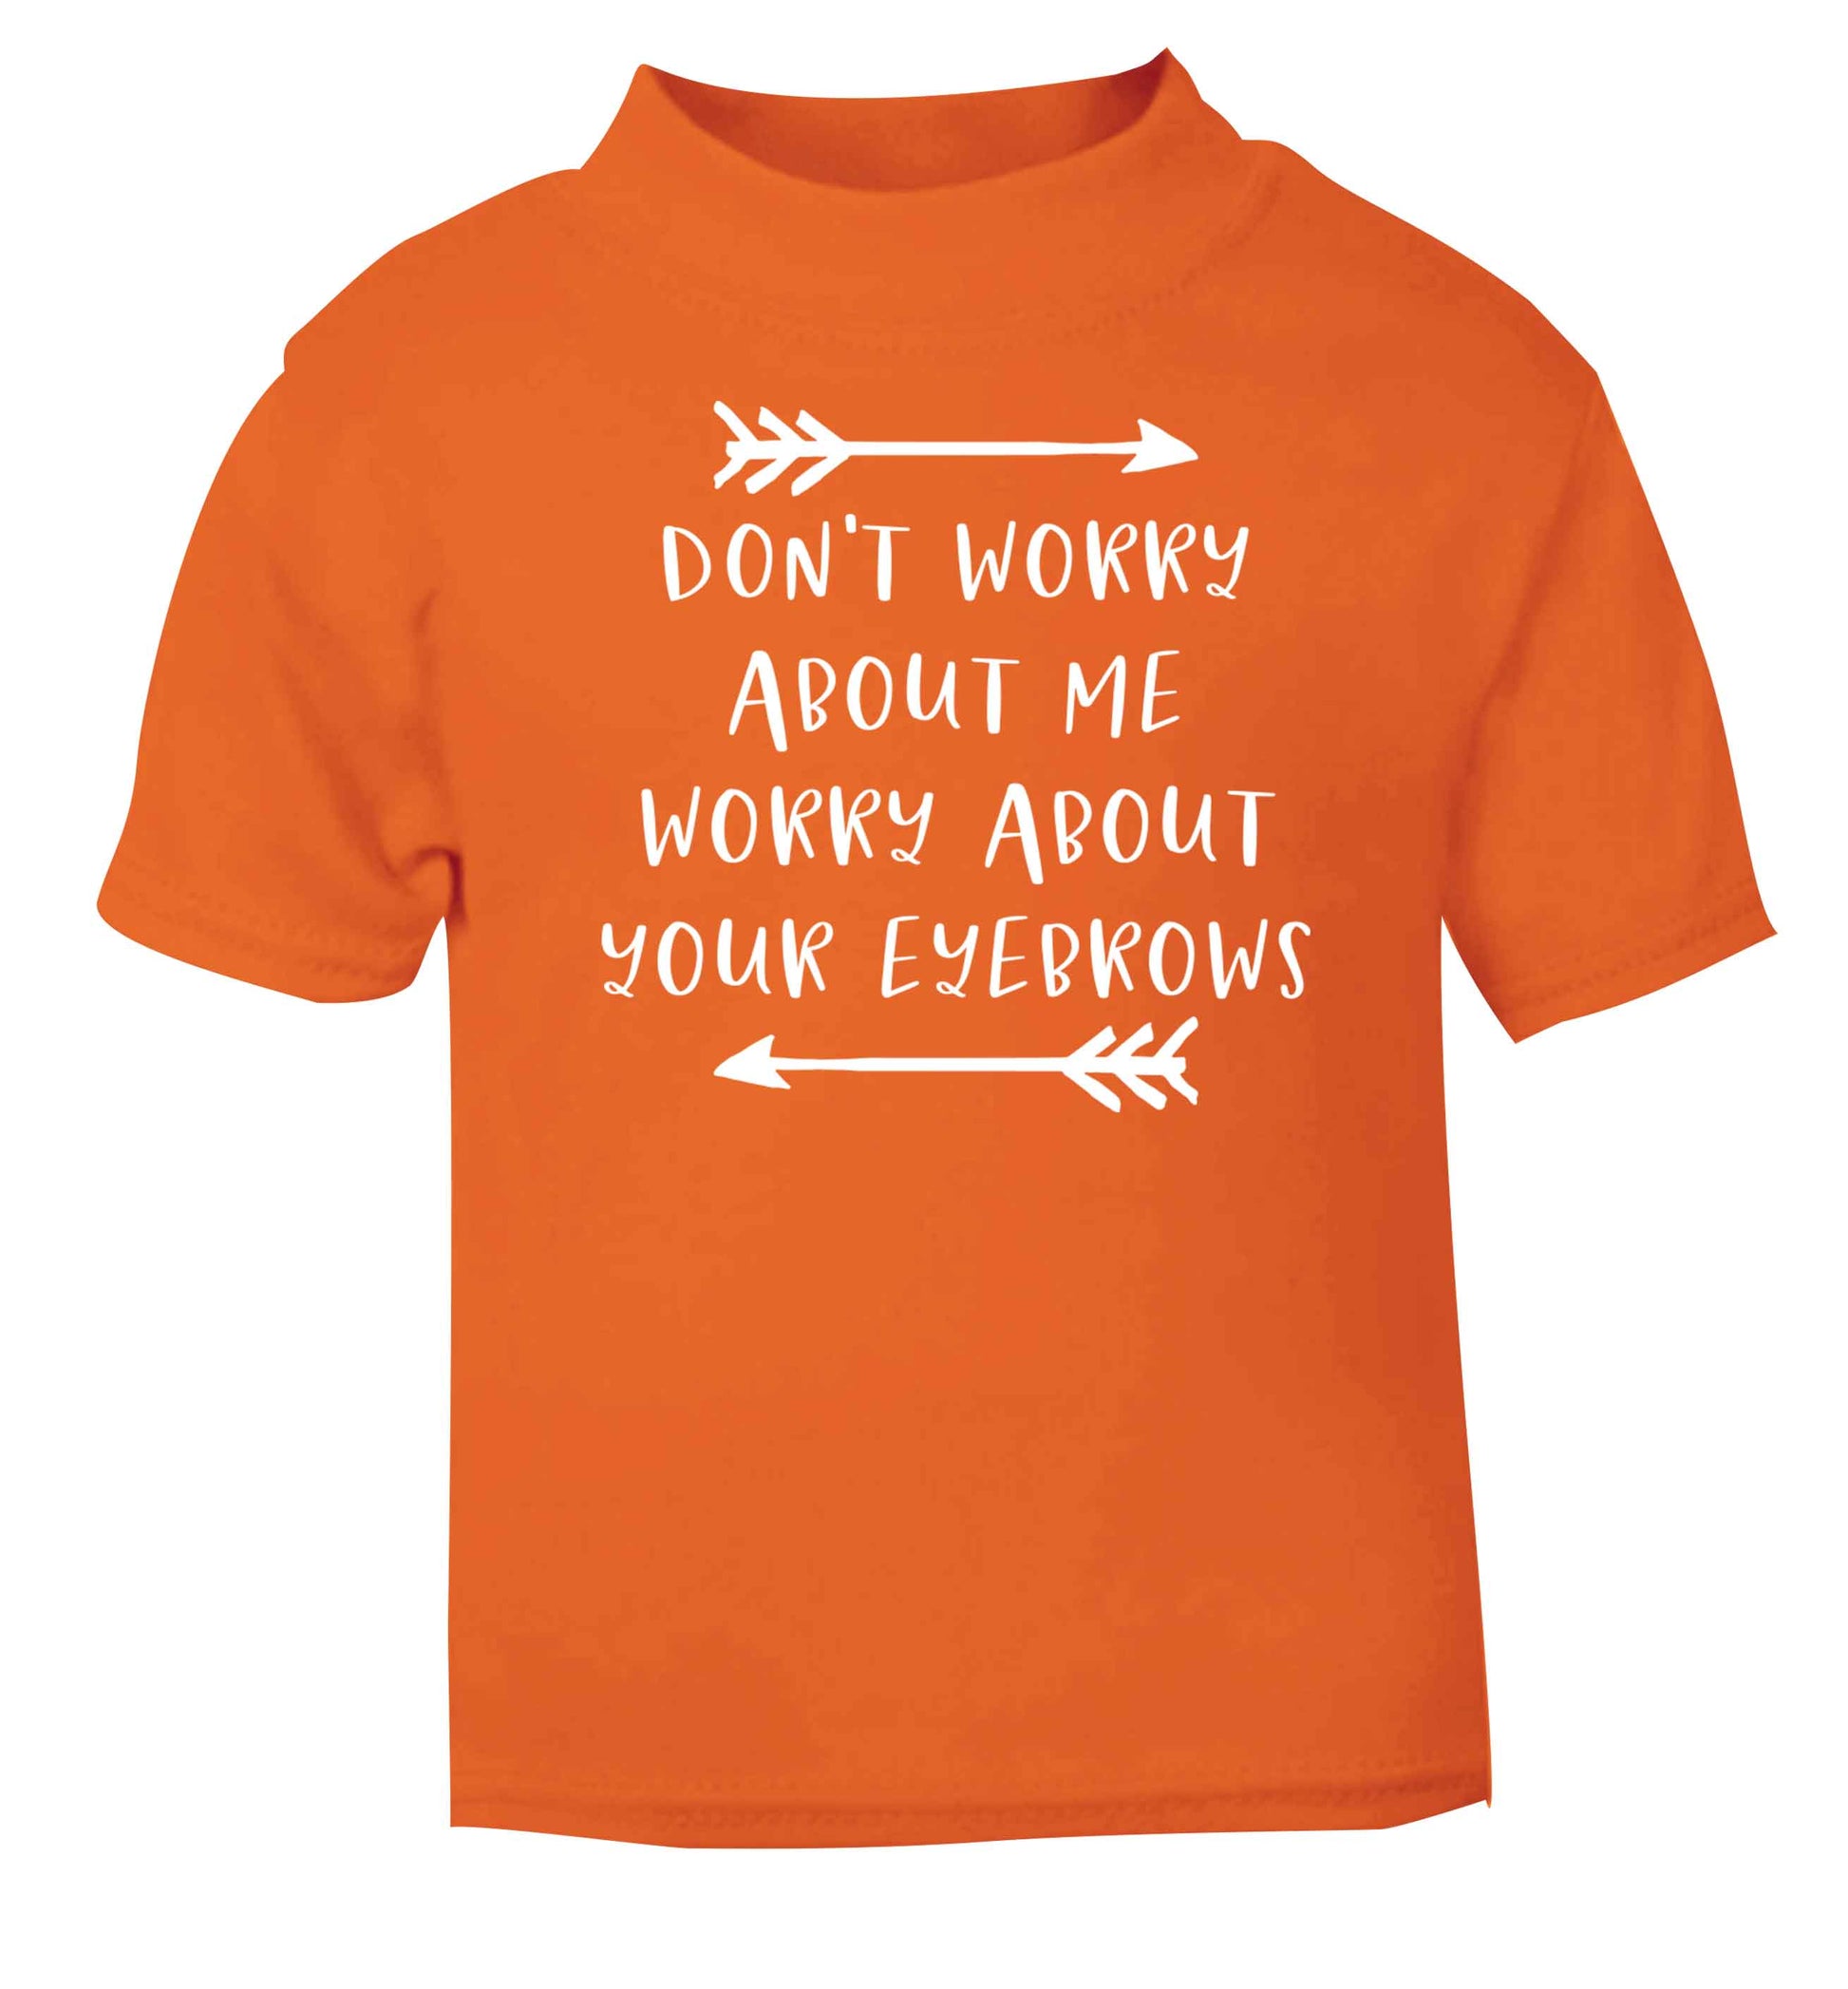 Don't worry about me worry about your eyebrows orange baby toddler Tshirt 2 Years